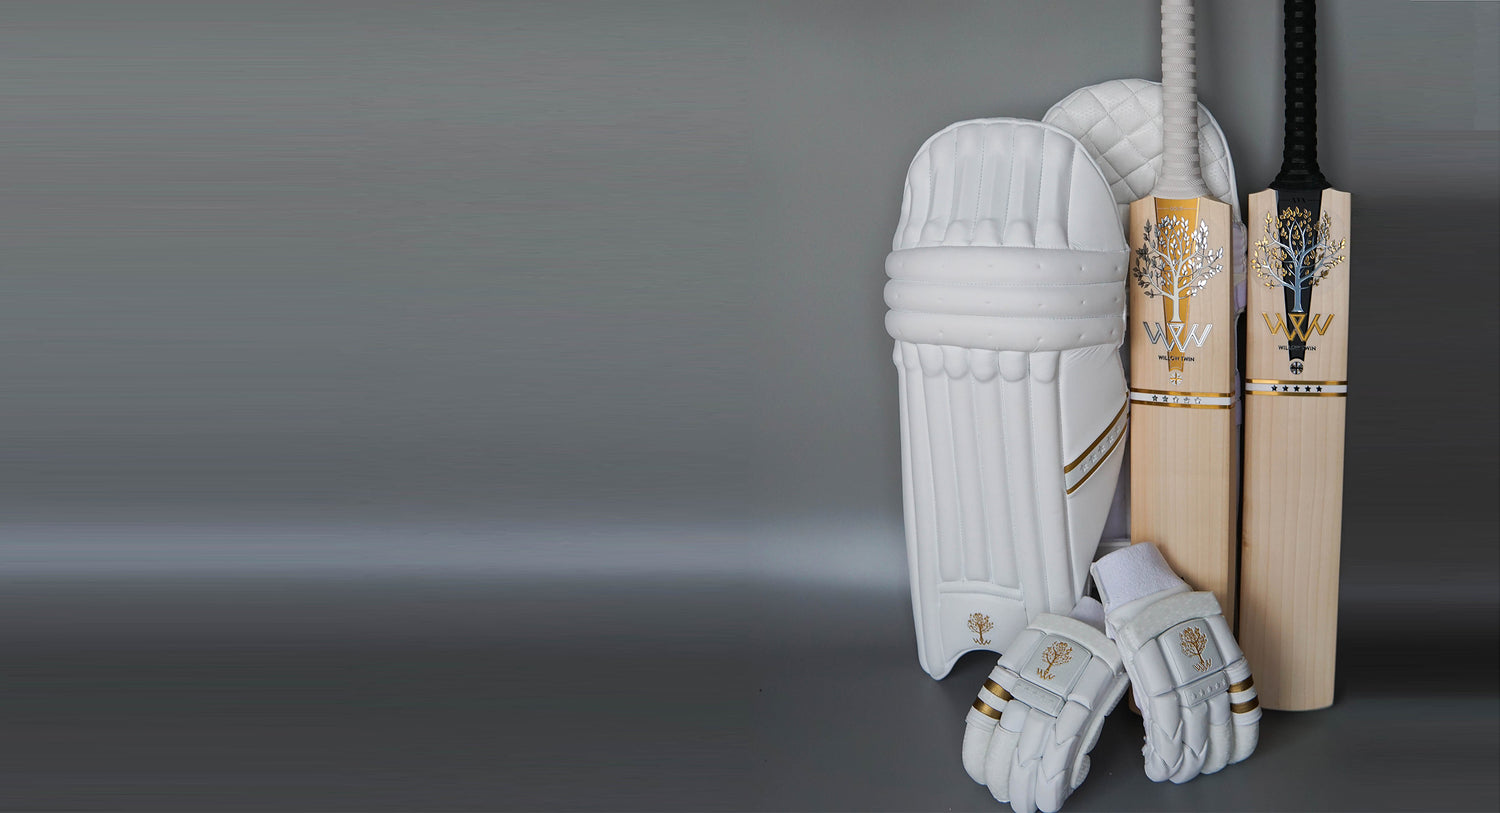 A cricket bat with a difference. The finest handmade English willow cricket bats.